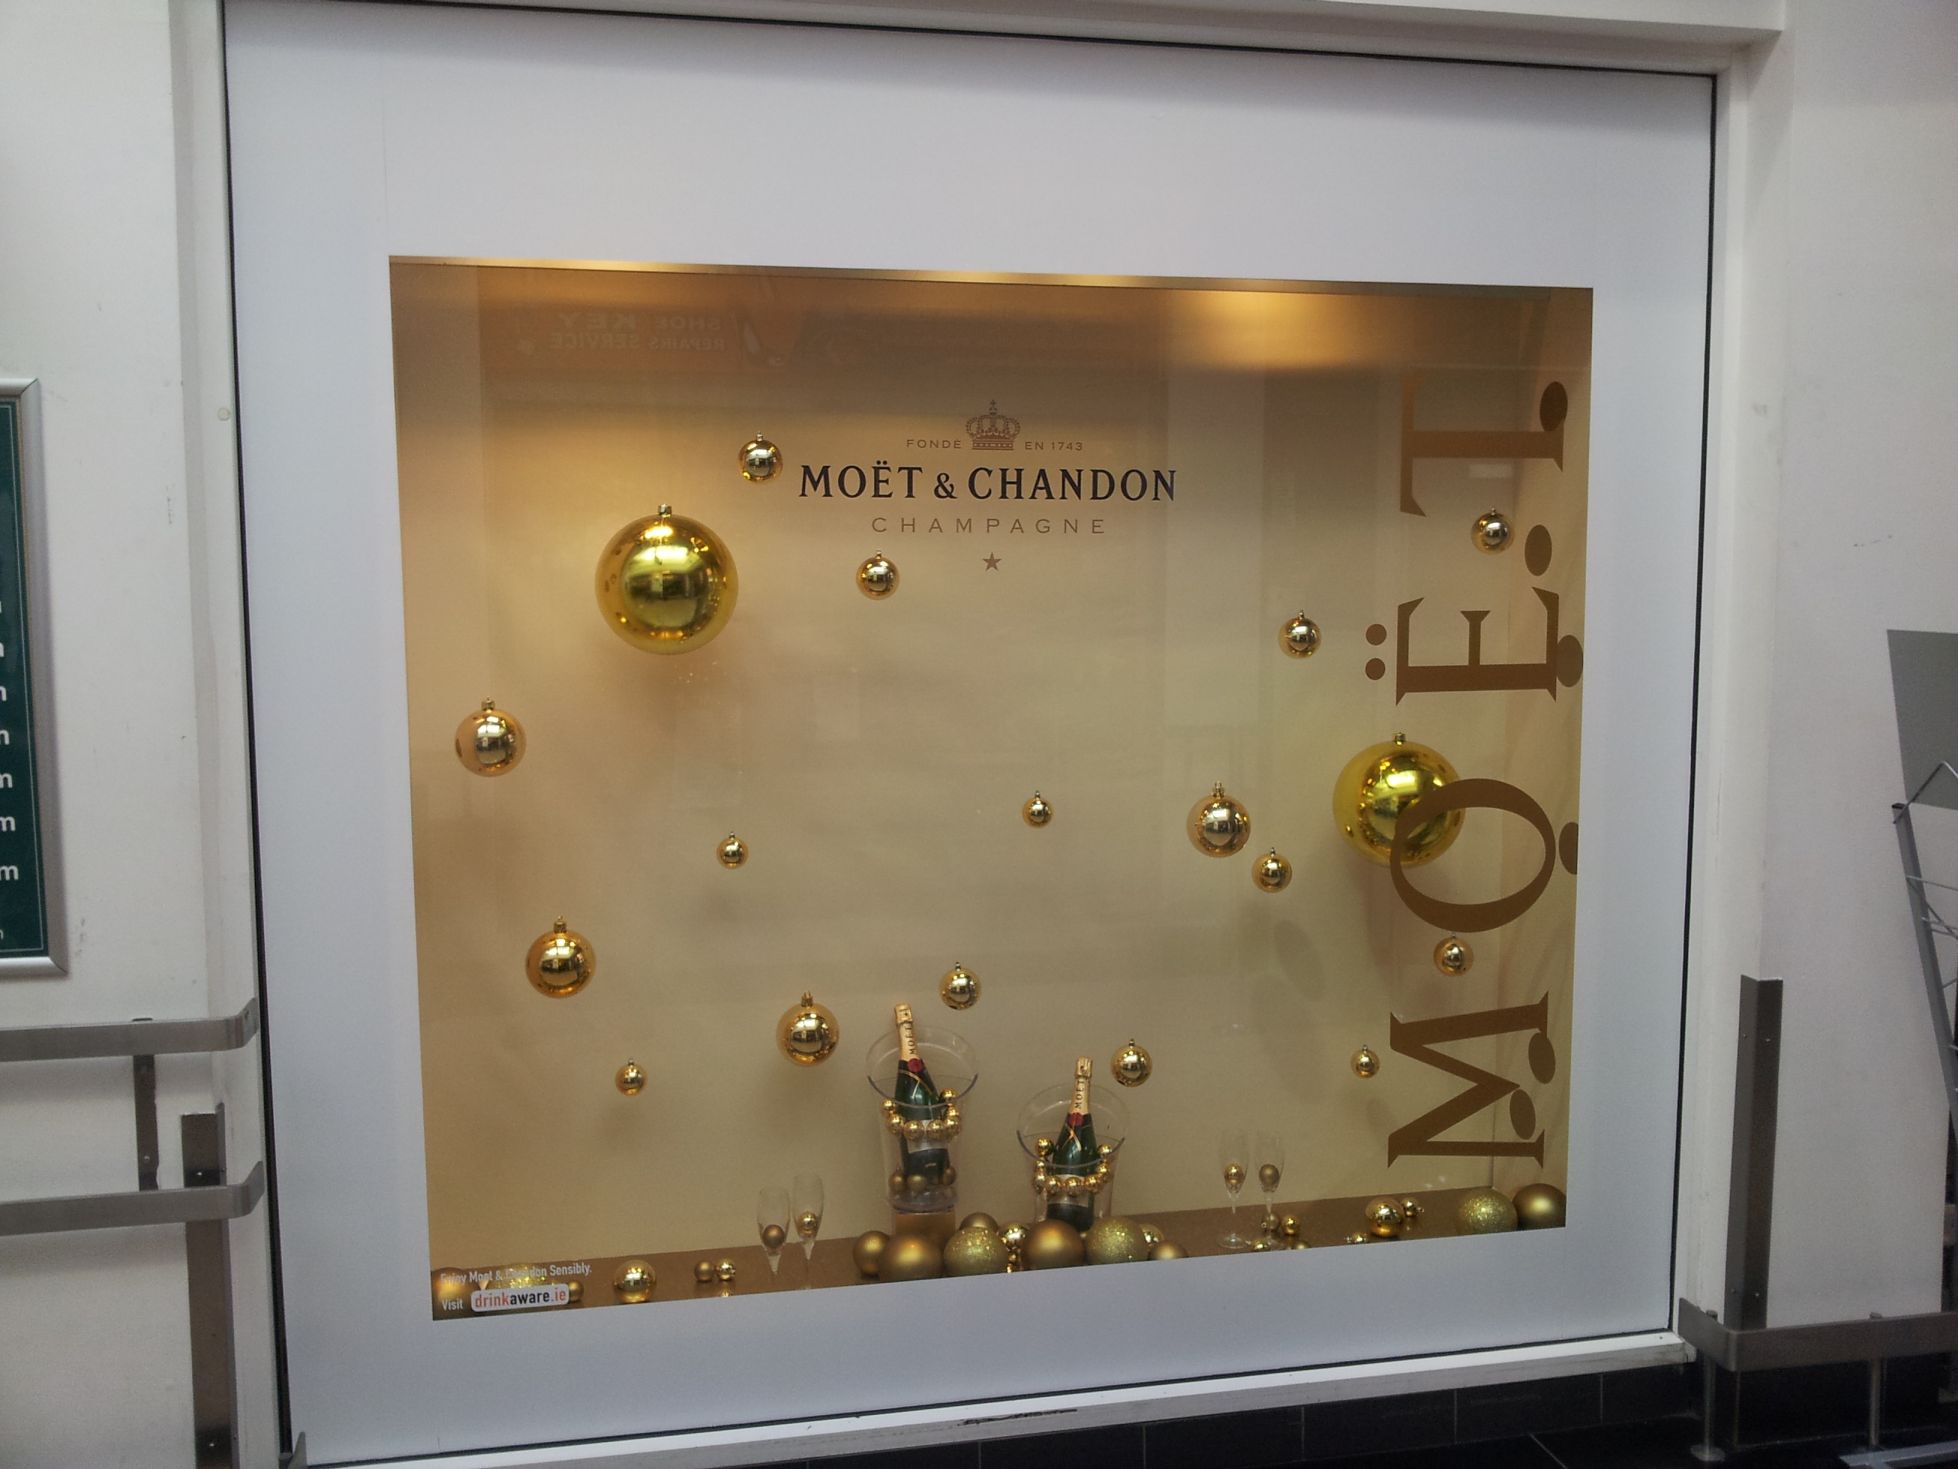 Moet & Chandon window display in association with Edward Dillon